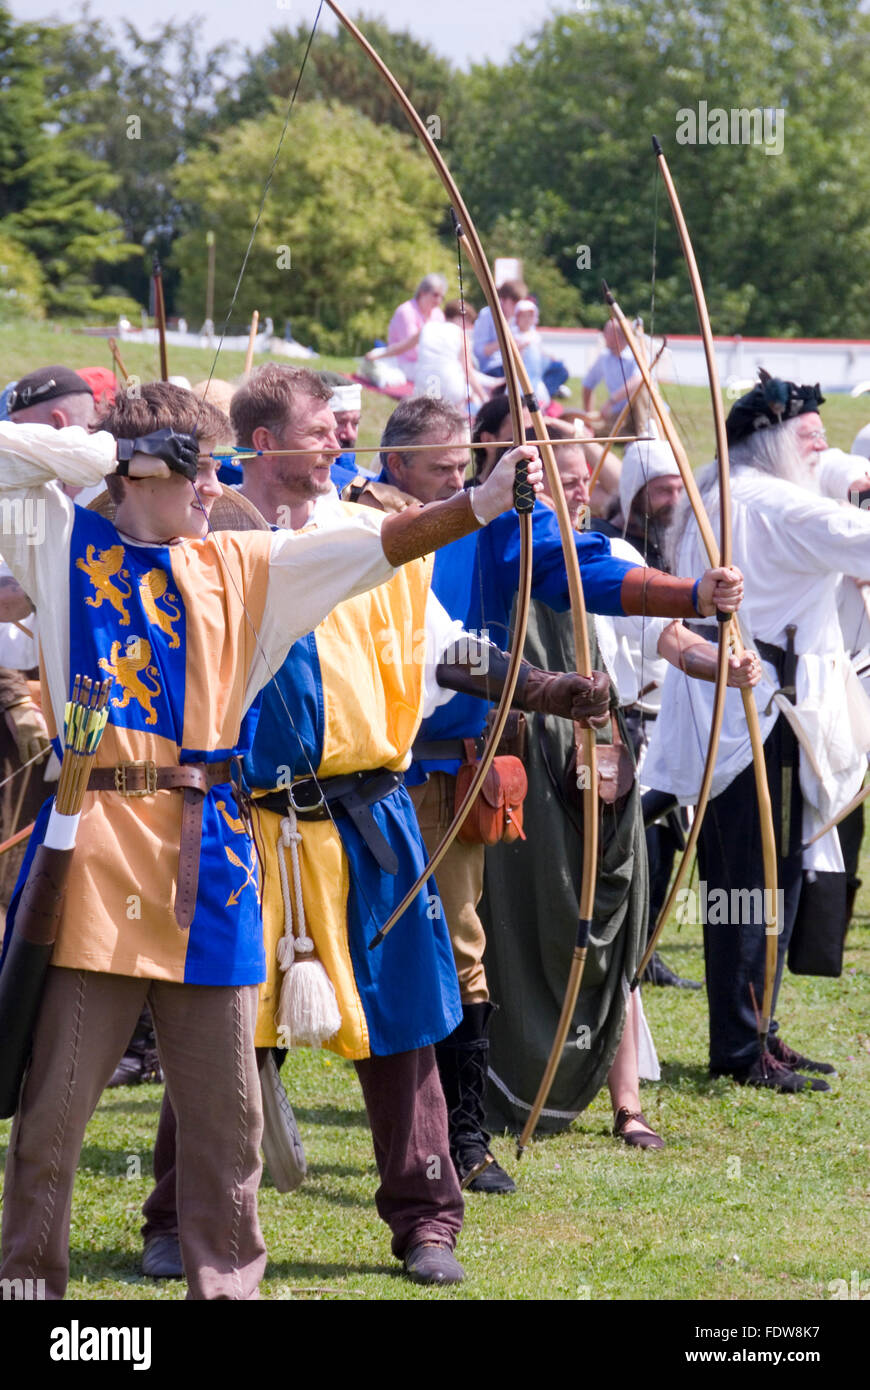 TEWKESBURY, GLOC. UK-12 JULY: Re-enactors compete in longbow archery competition on 12 July 2014 at Tewkesbury Medieval Festival Stock Photo